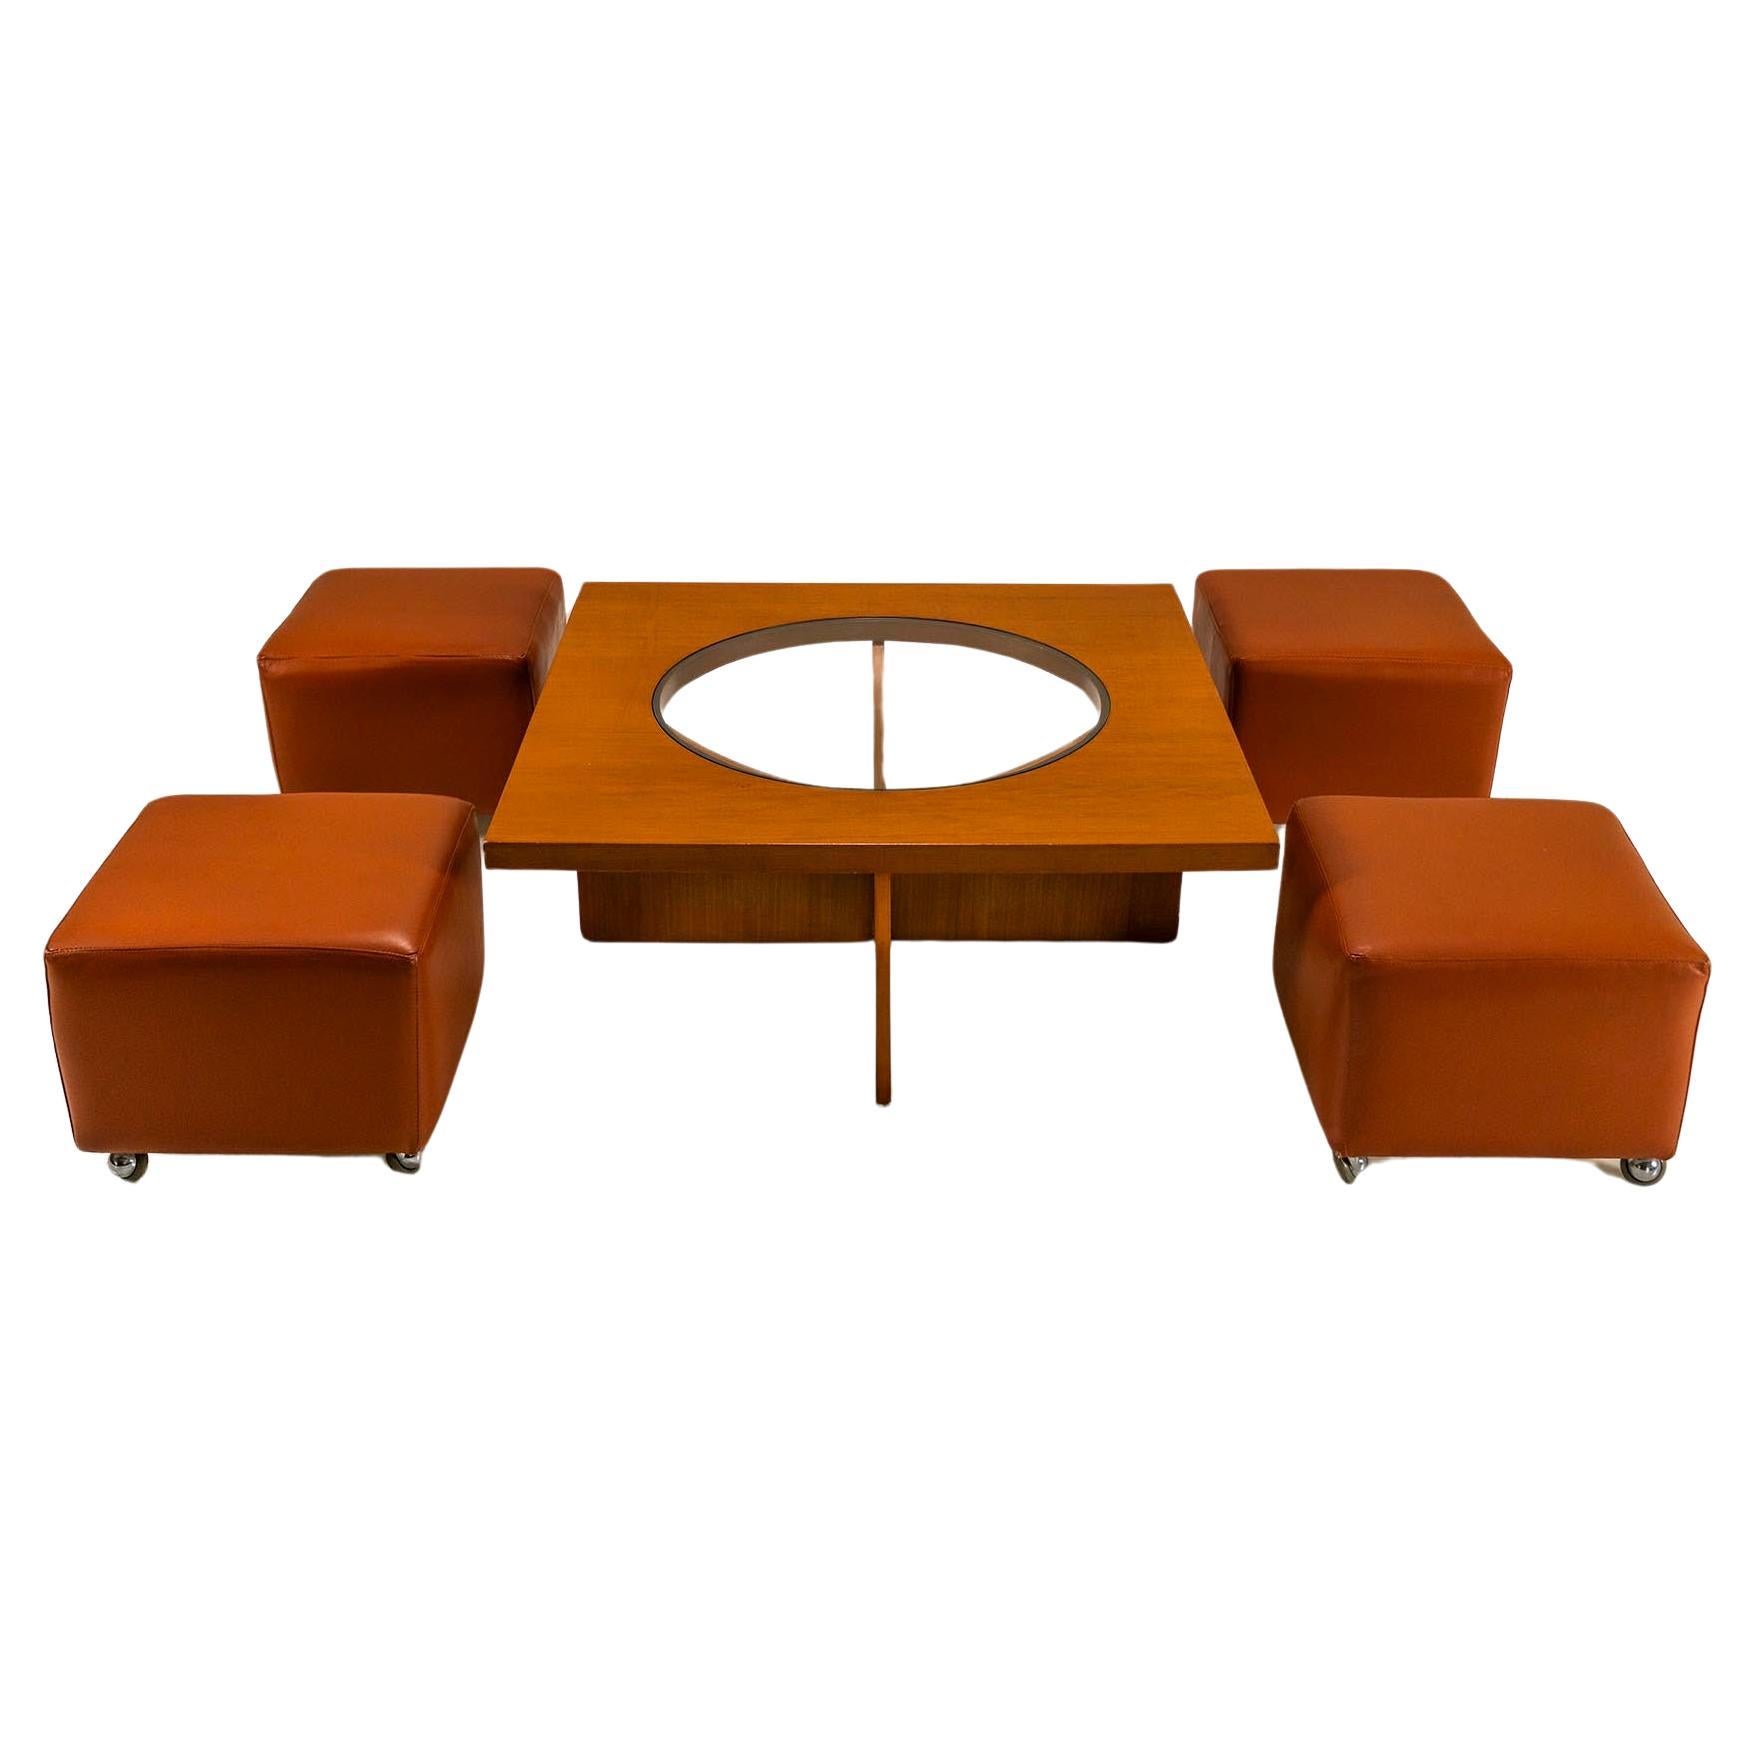 Coffee Table In Cherry Wood With Four Faux Mobile Poufs, Italy 1970's